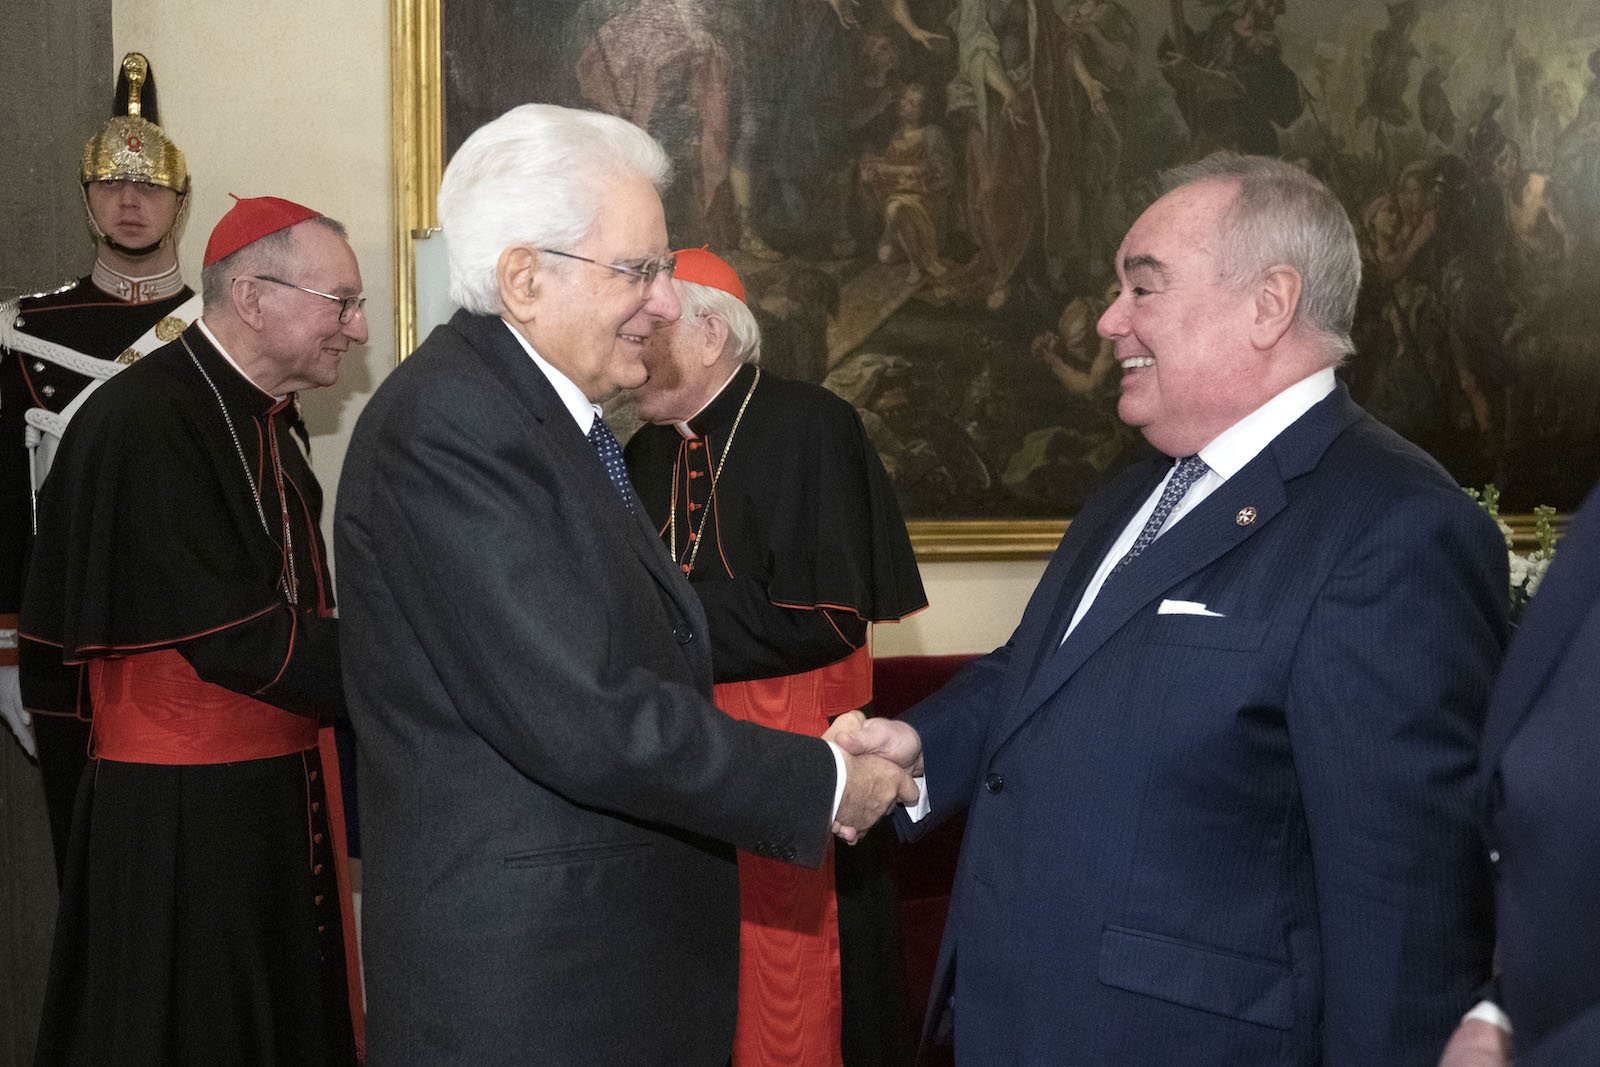 The Lieutenant of the Grand Master of the Order of Malta meets the President of the Italian Republic